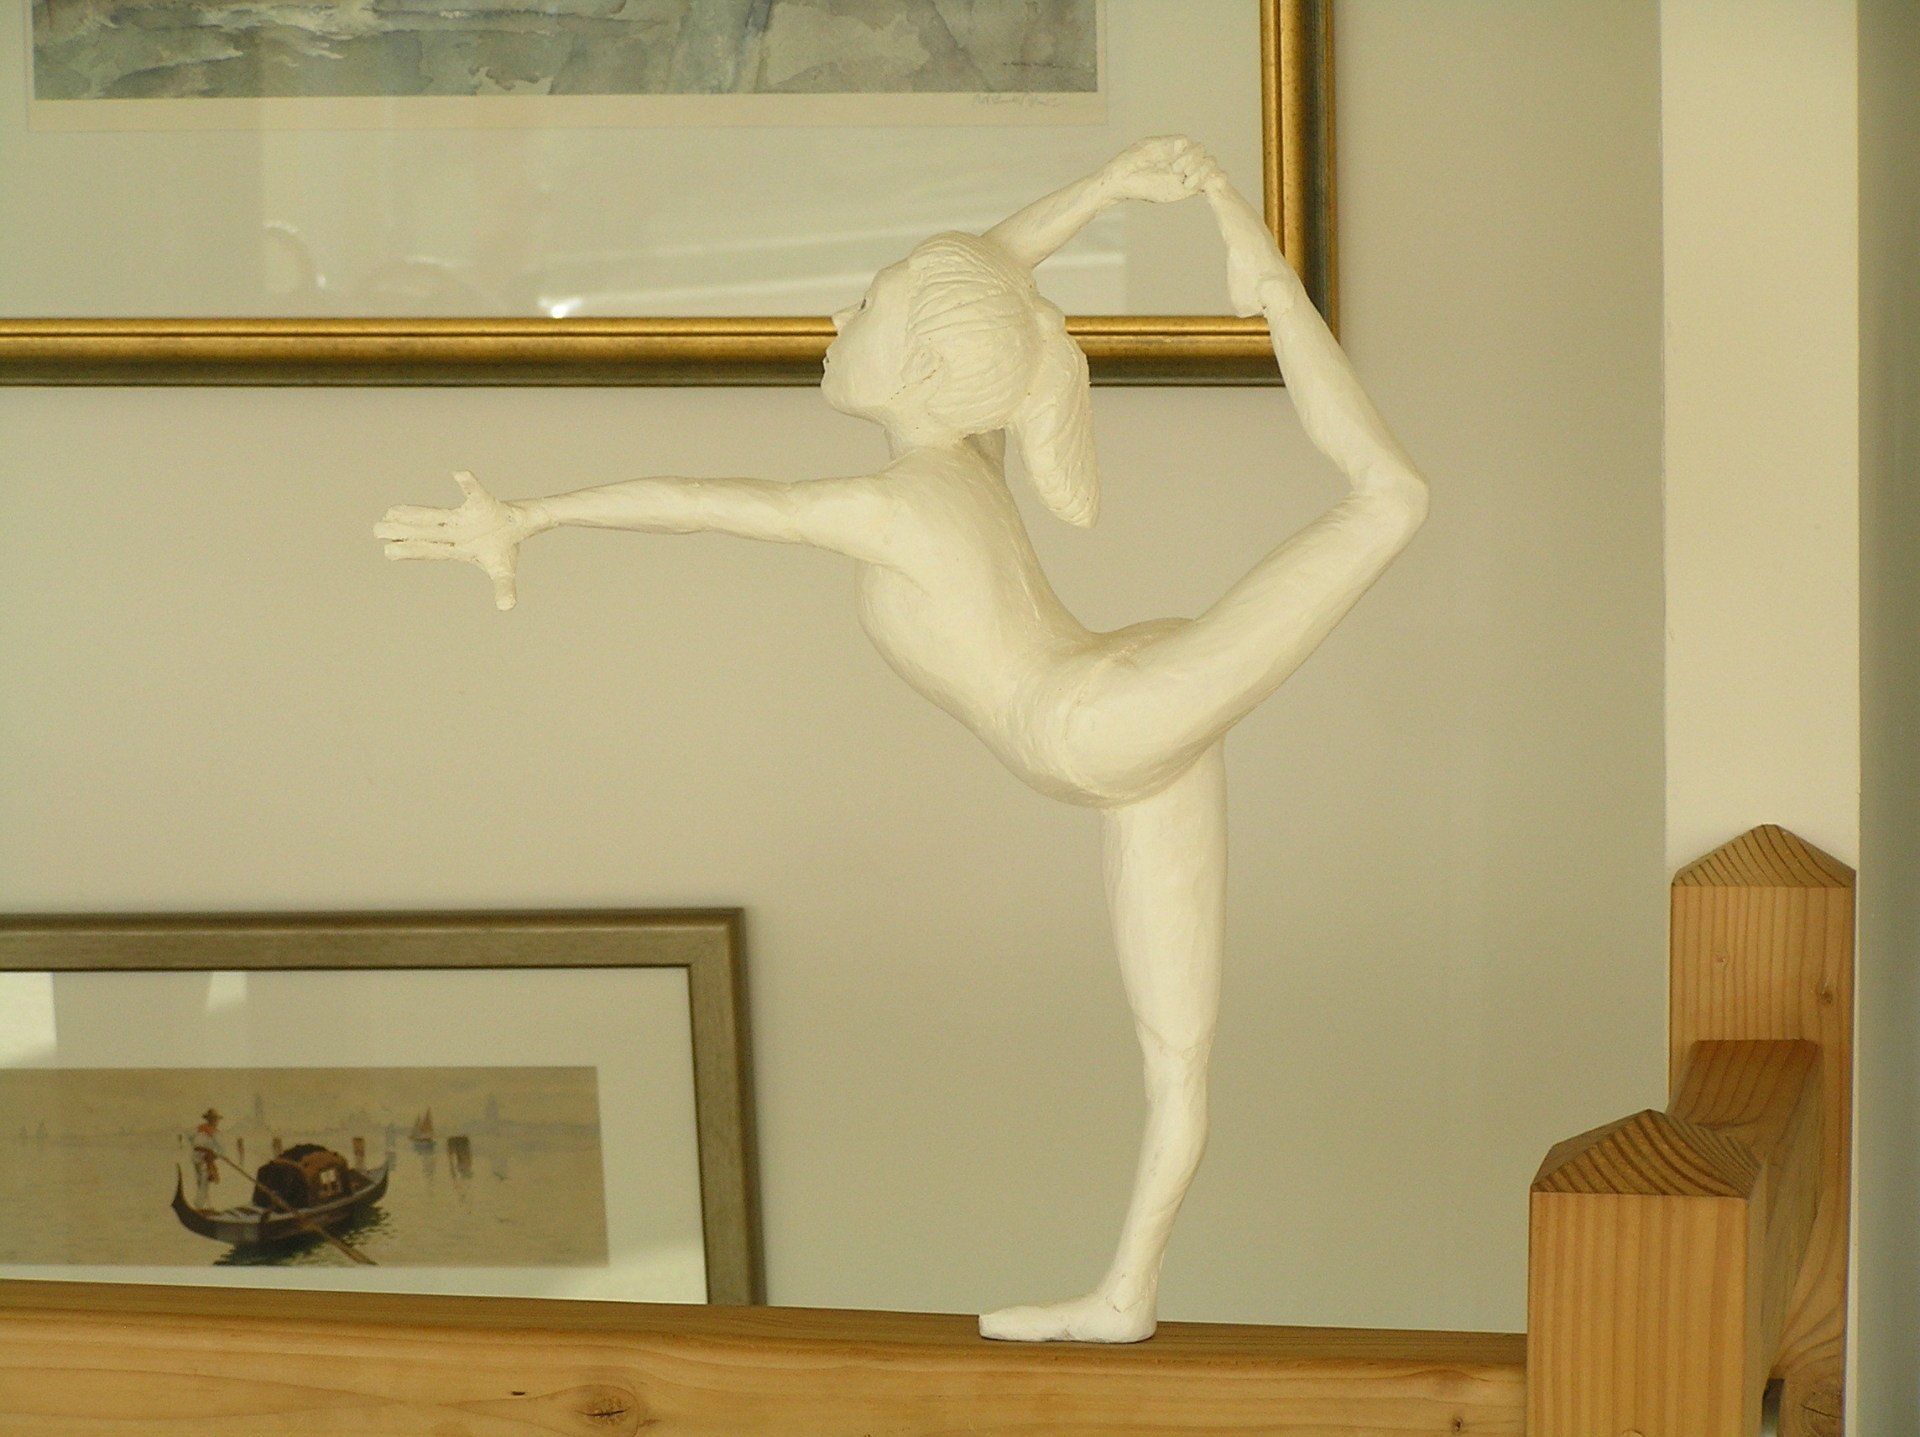 Small scale sculpture of a gymnast by Ingrained Culture